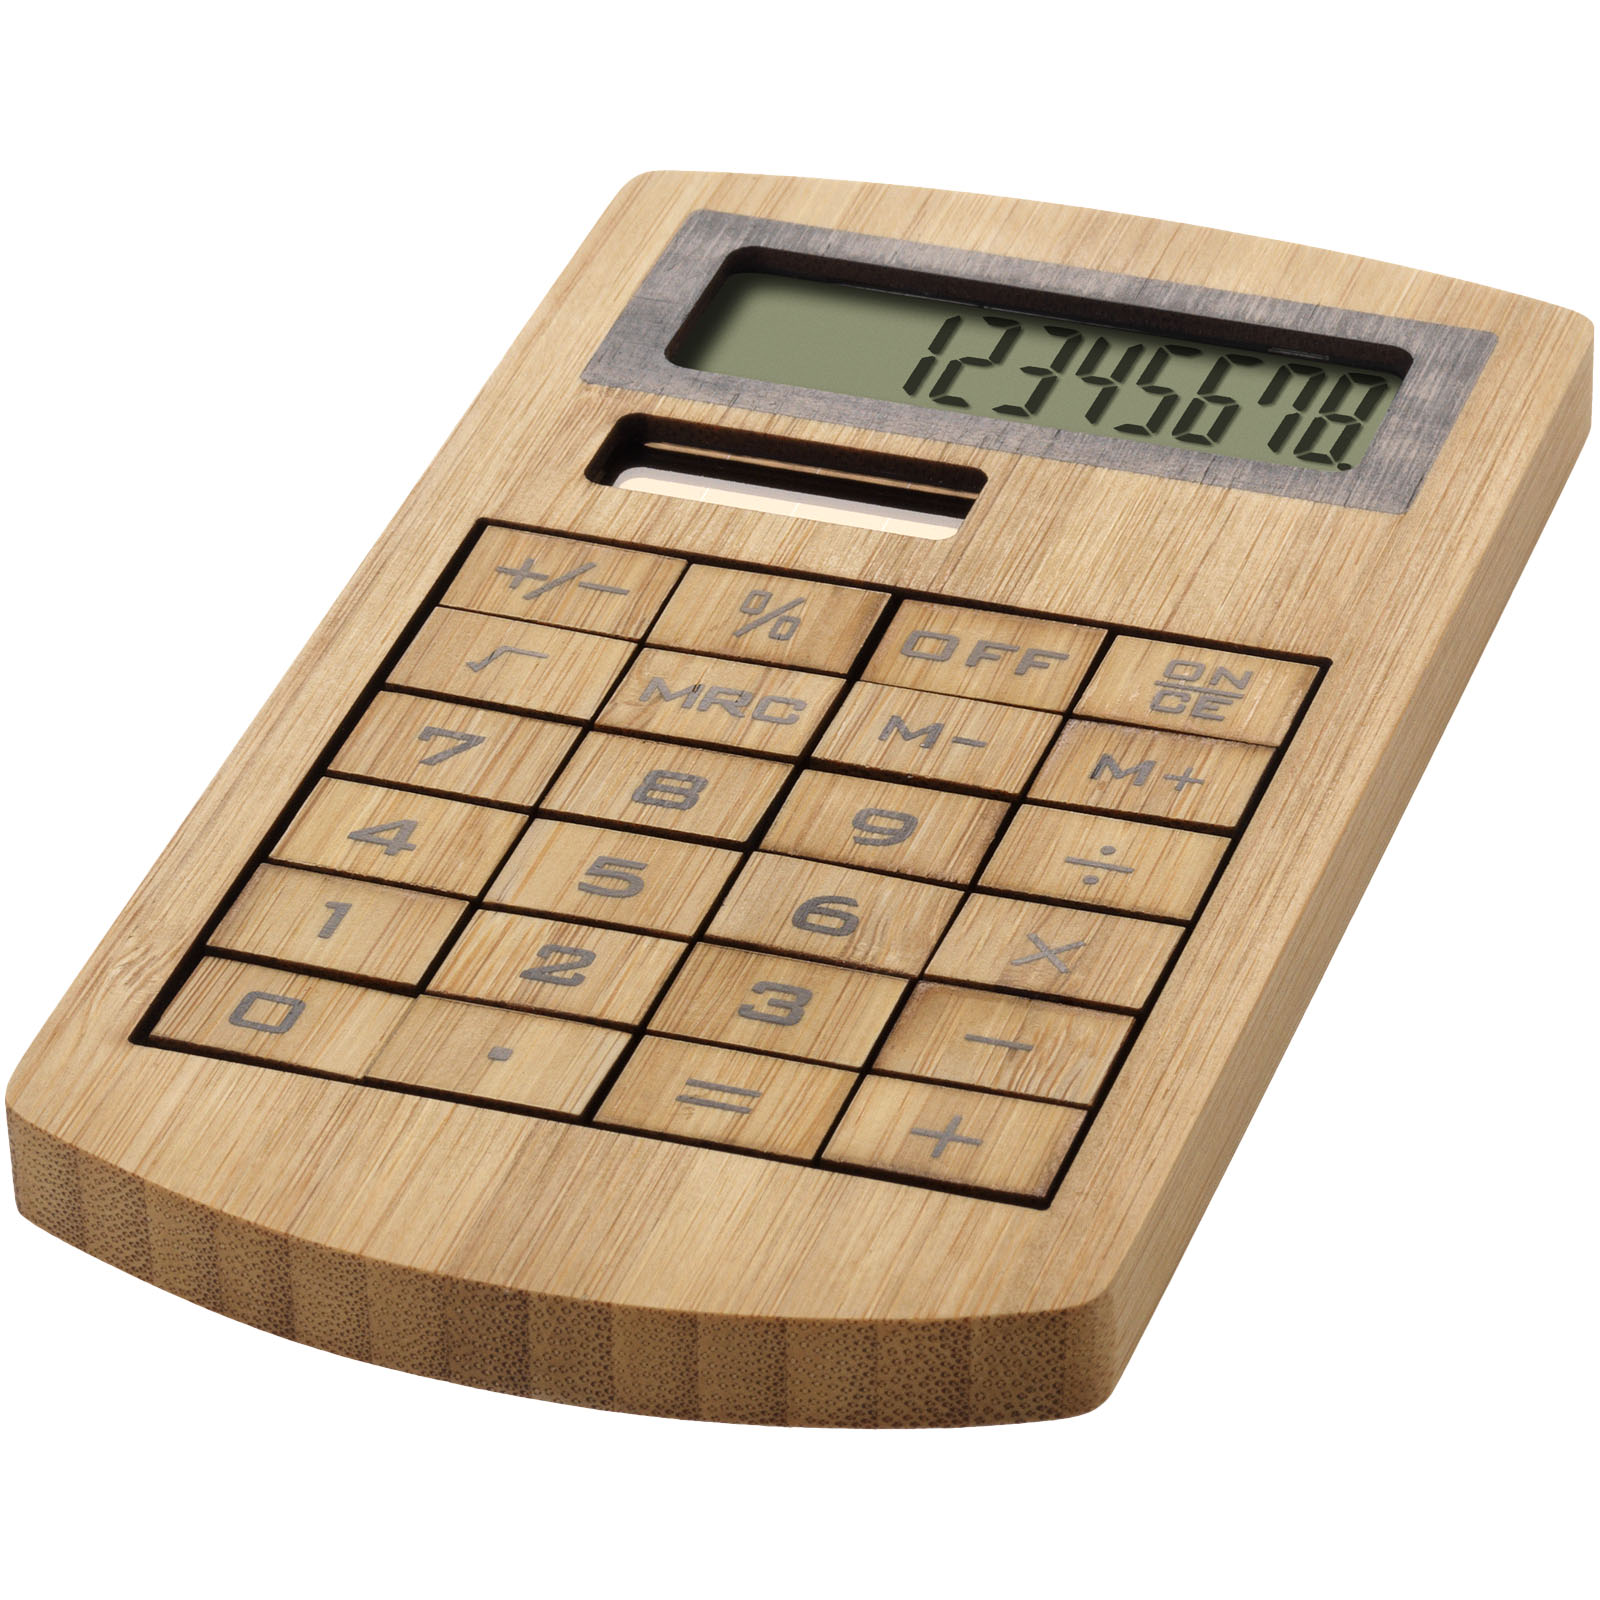 Advertising Desk Accessories - Eugene calculator made of bamboo - 0